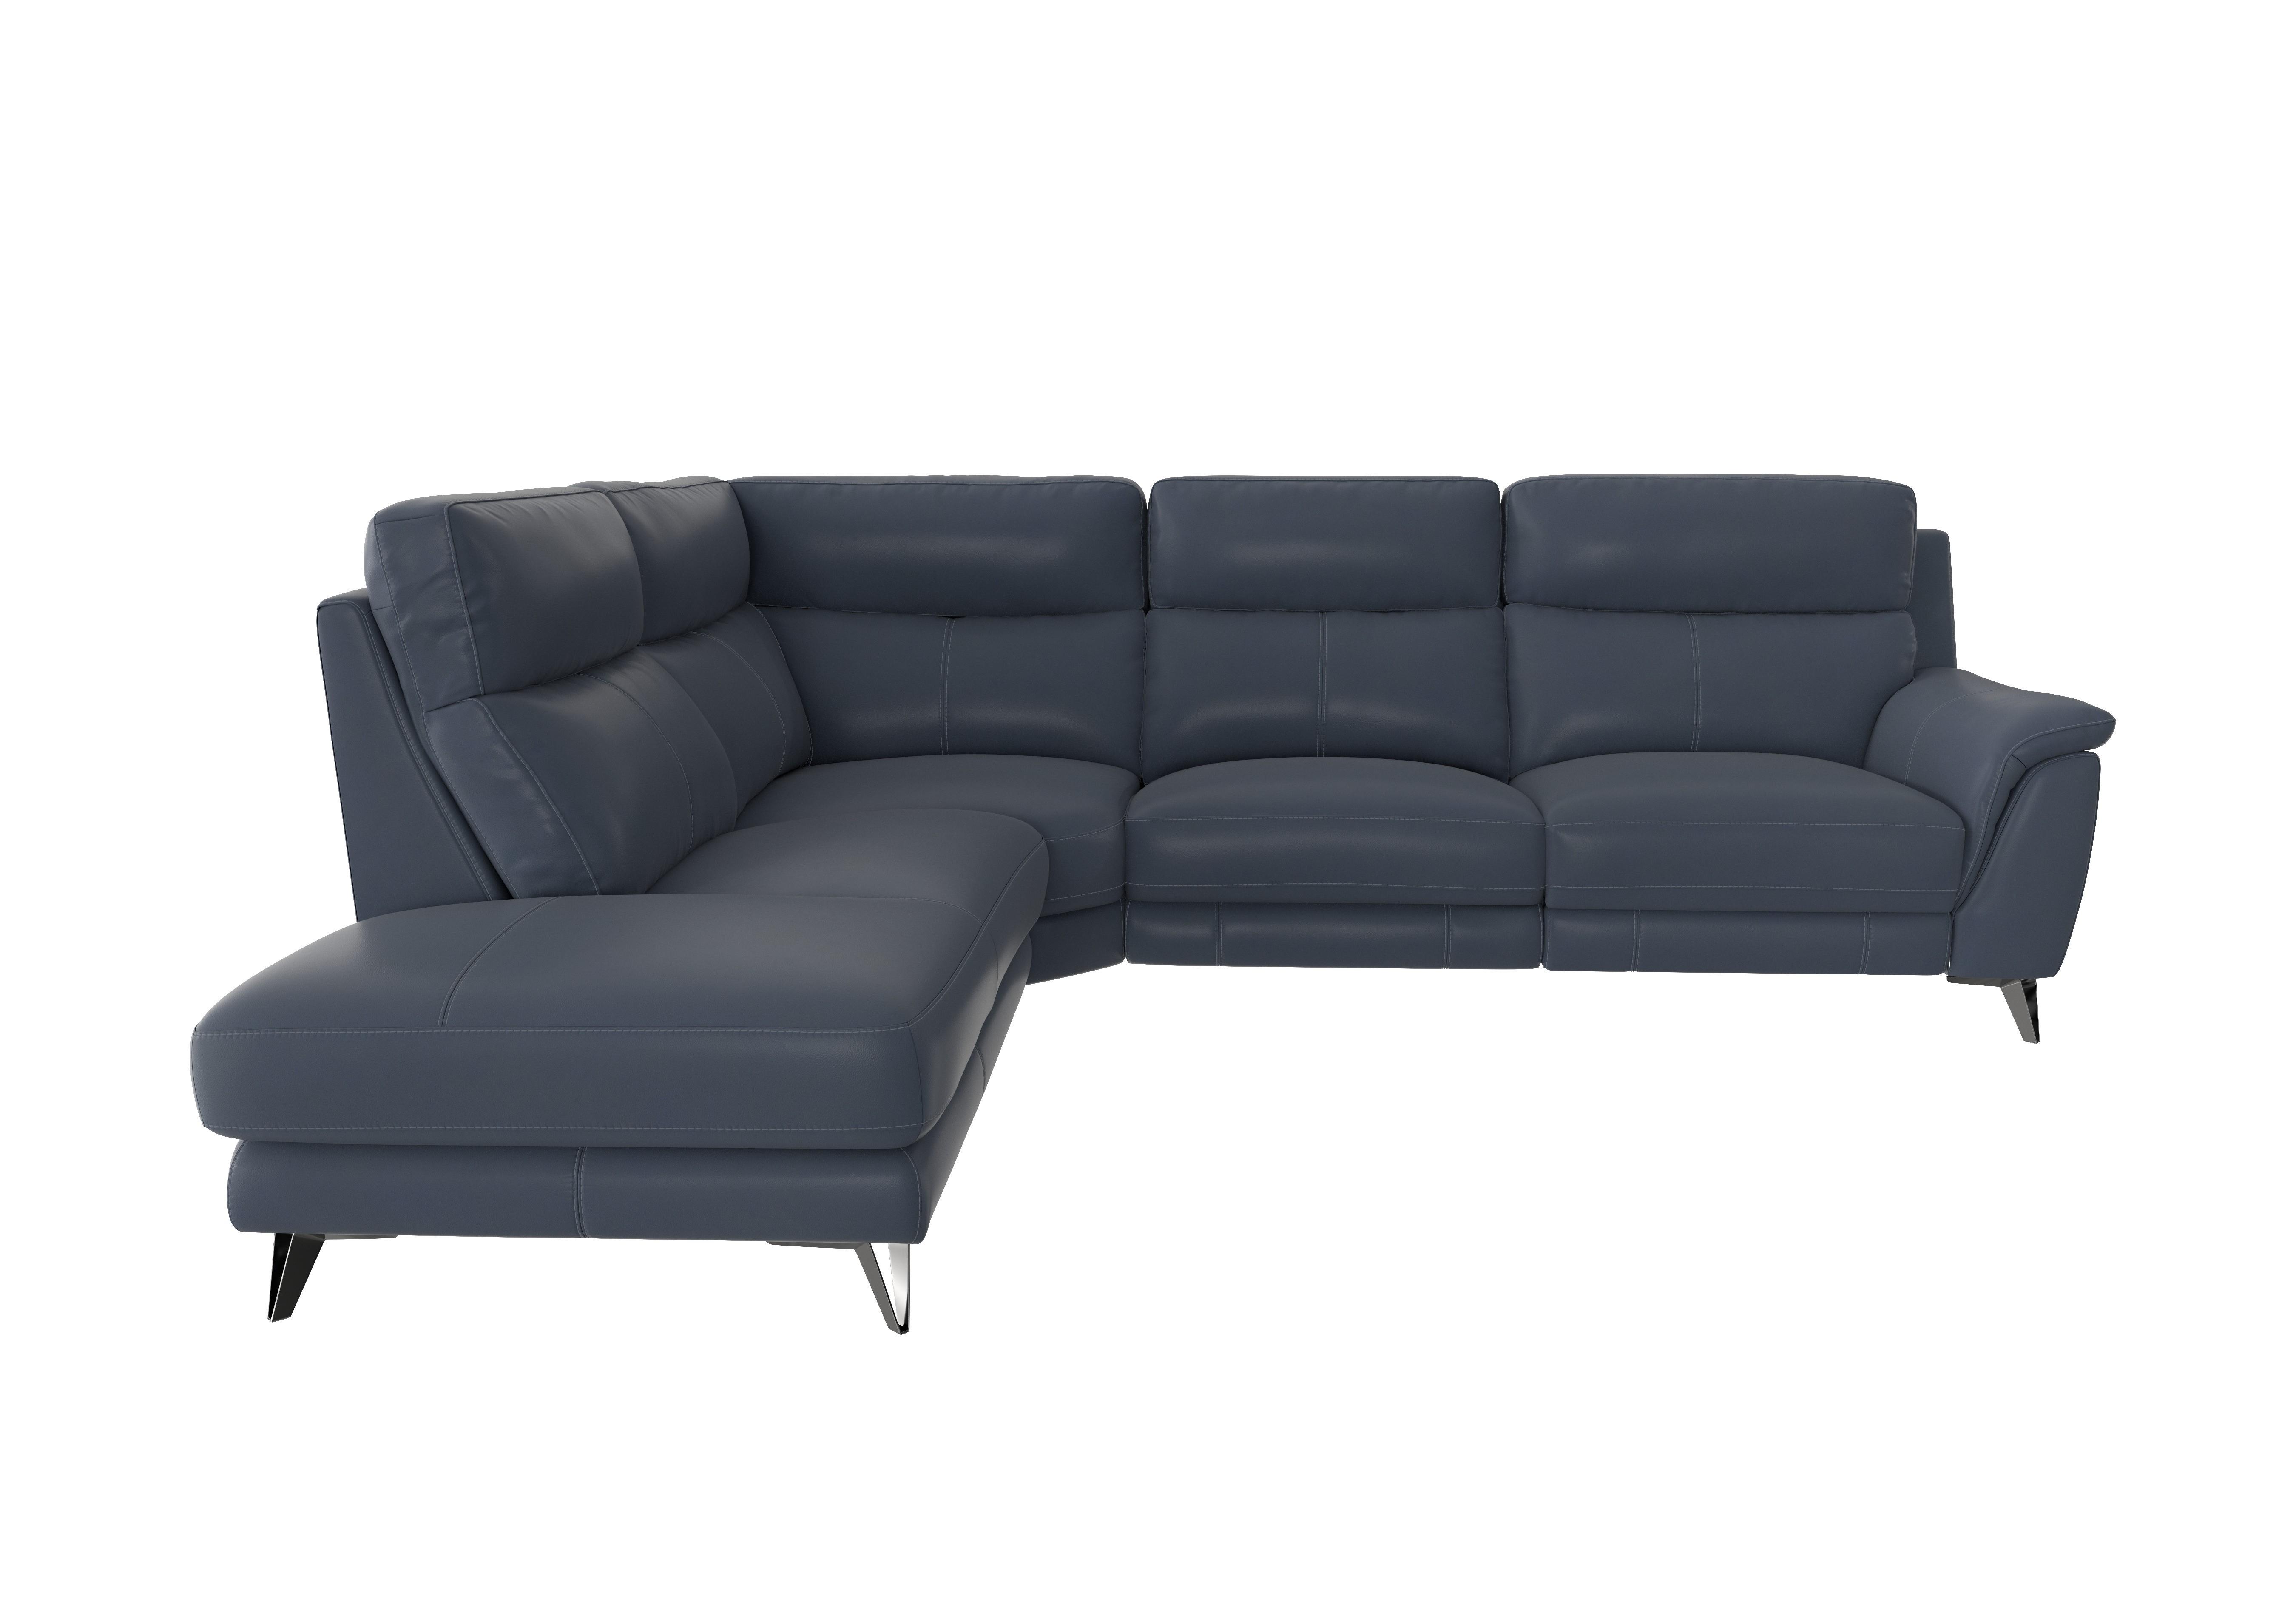 Contempo Chaise End Leather Sofa in Bv-313e Ocean Blue on Furniture Village